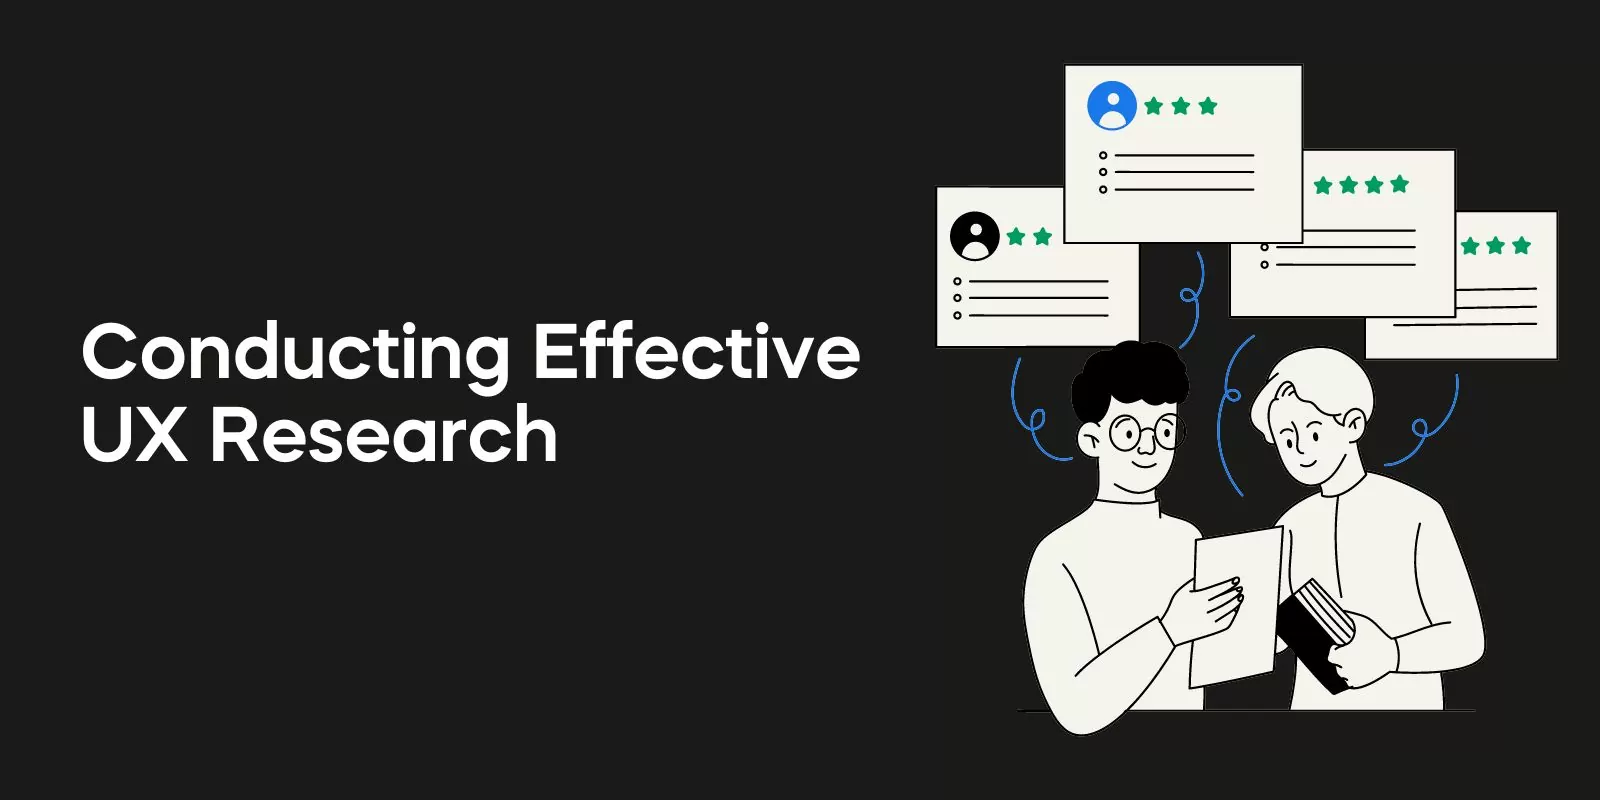 Conducting Effective UX Research